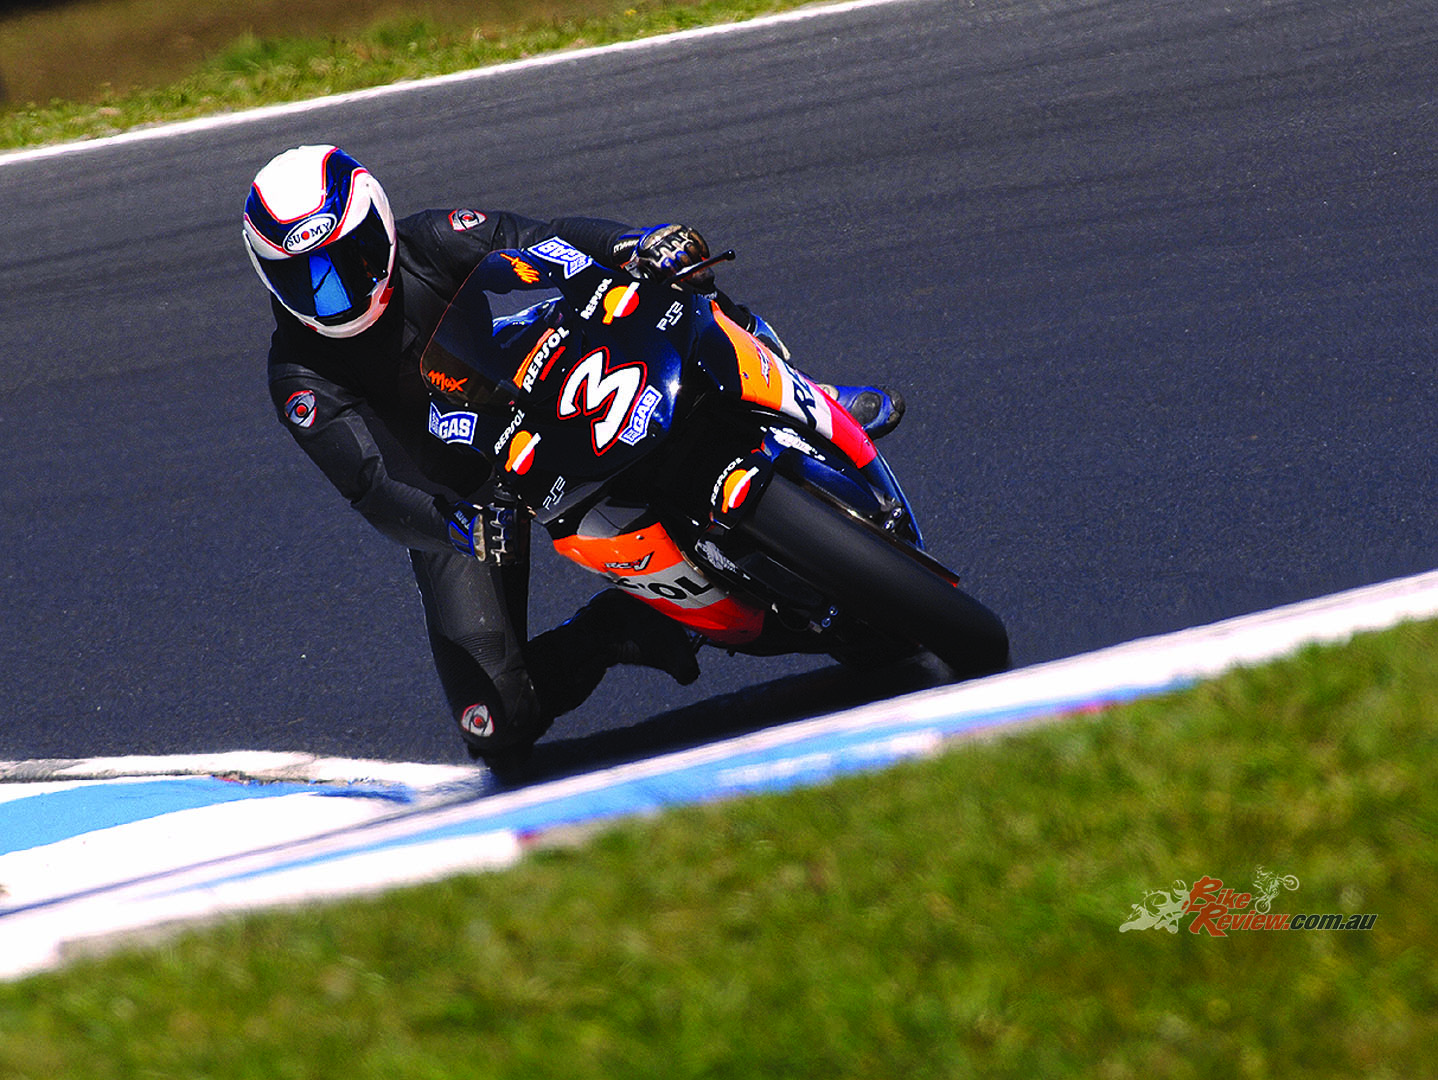 “Max likes to ride with lots of corner speed, so he runs the front very stiff and the rear quite soft. That didn’t really work too well for me as I’m more aggressive on the throttle off the turns." said Wayne.